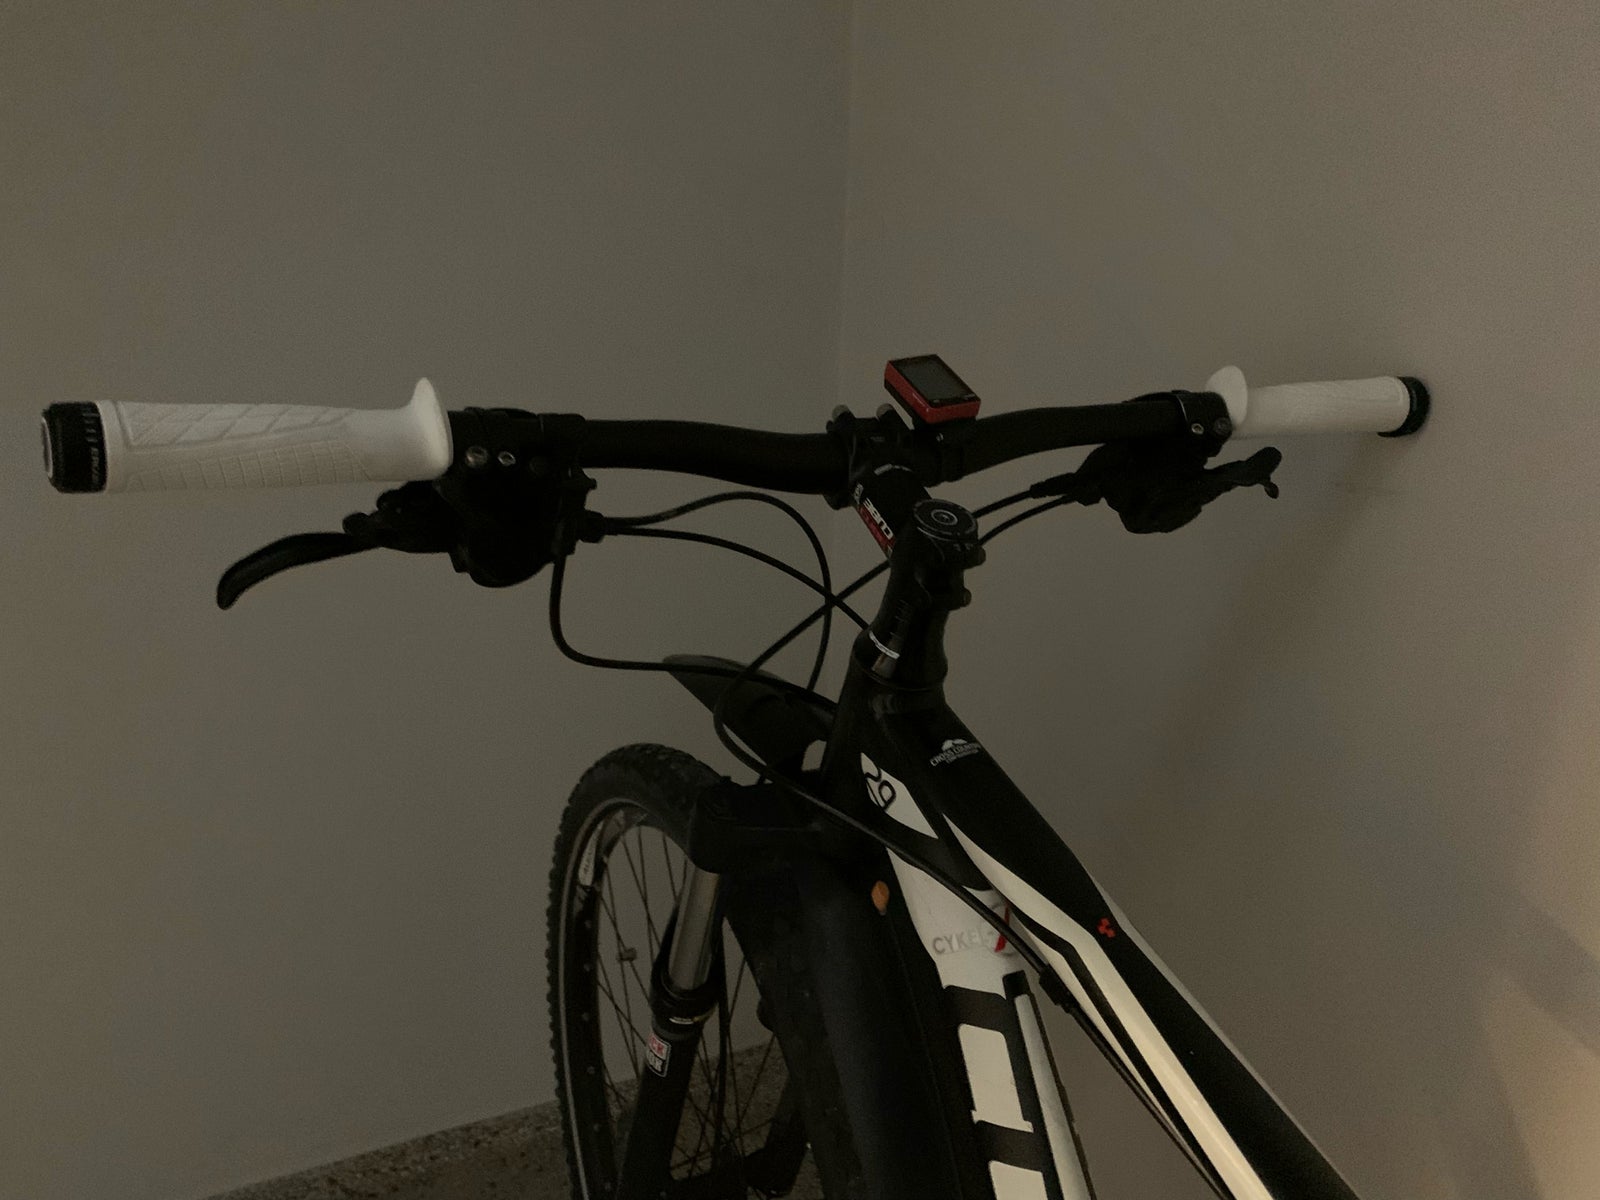 Cube Attention, hardtail, M tommer